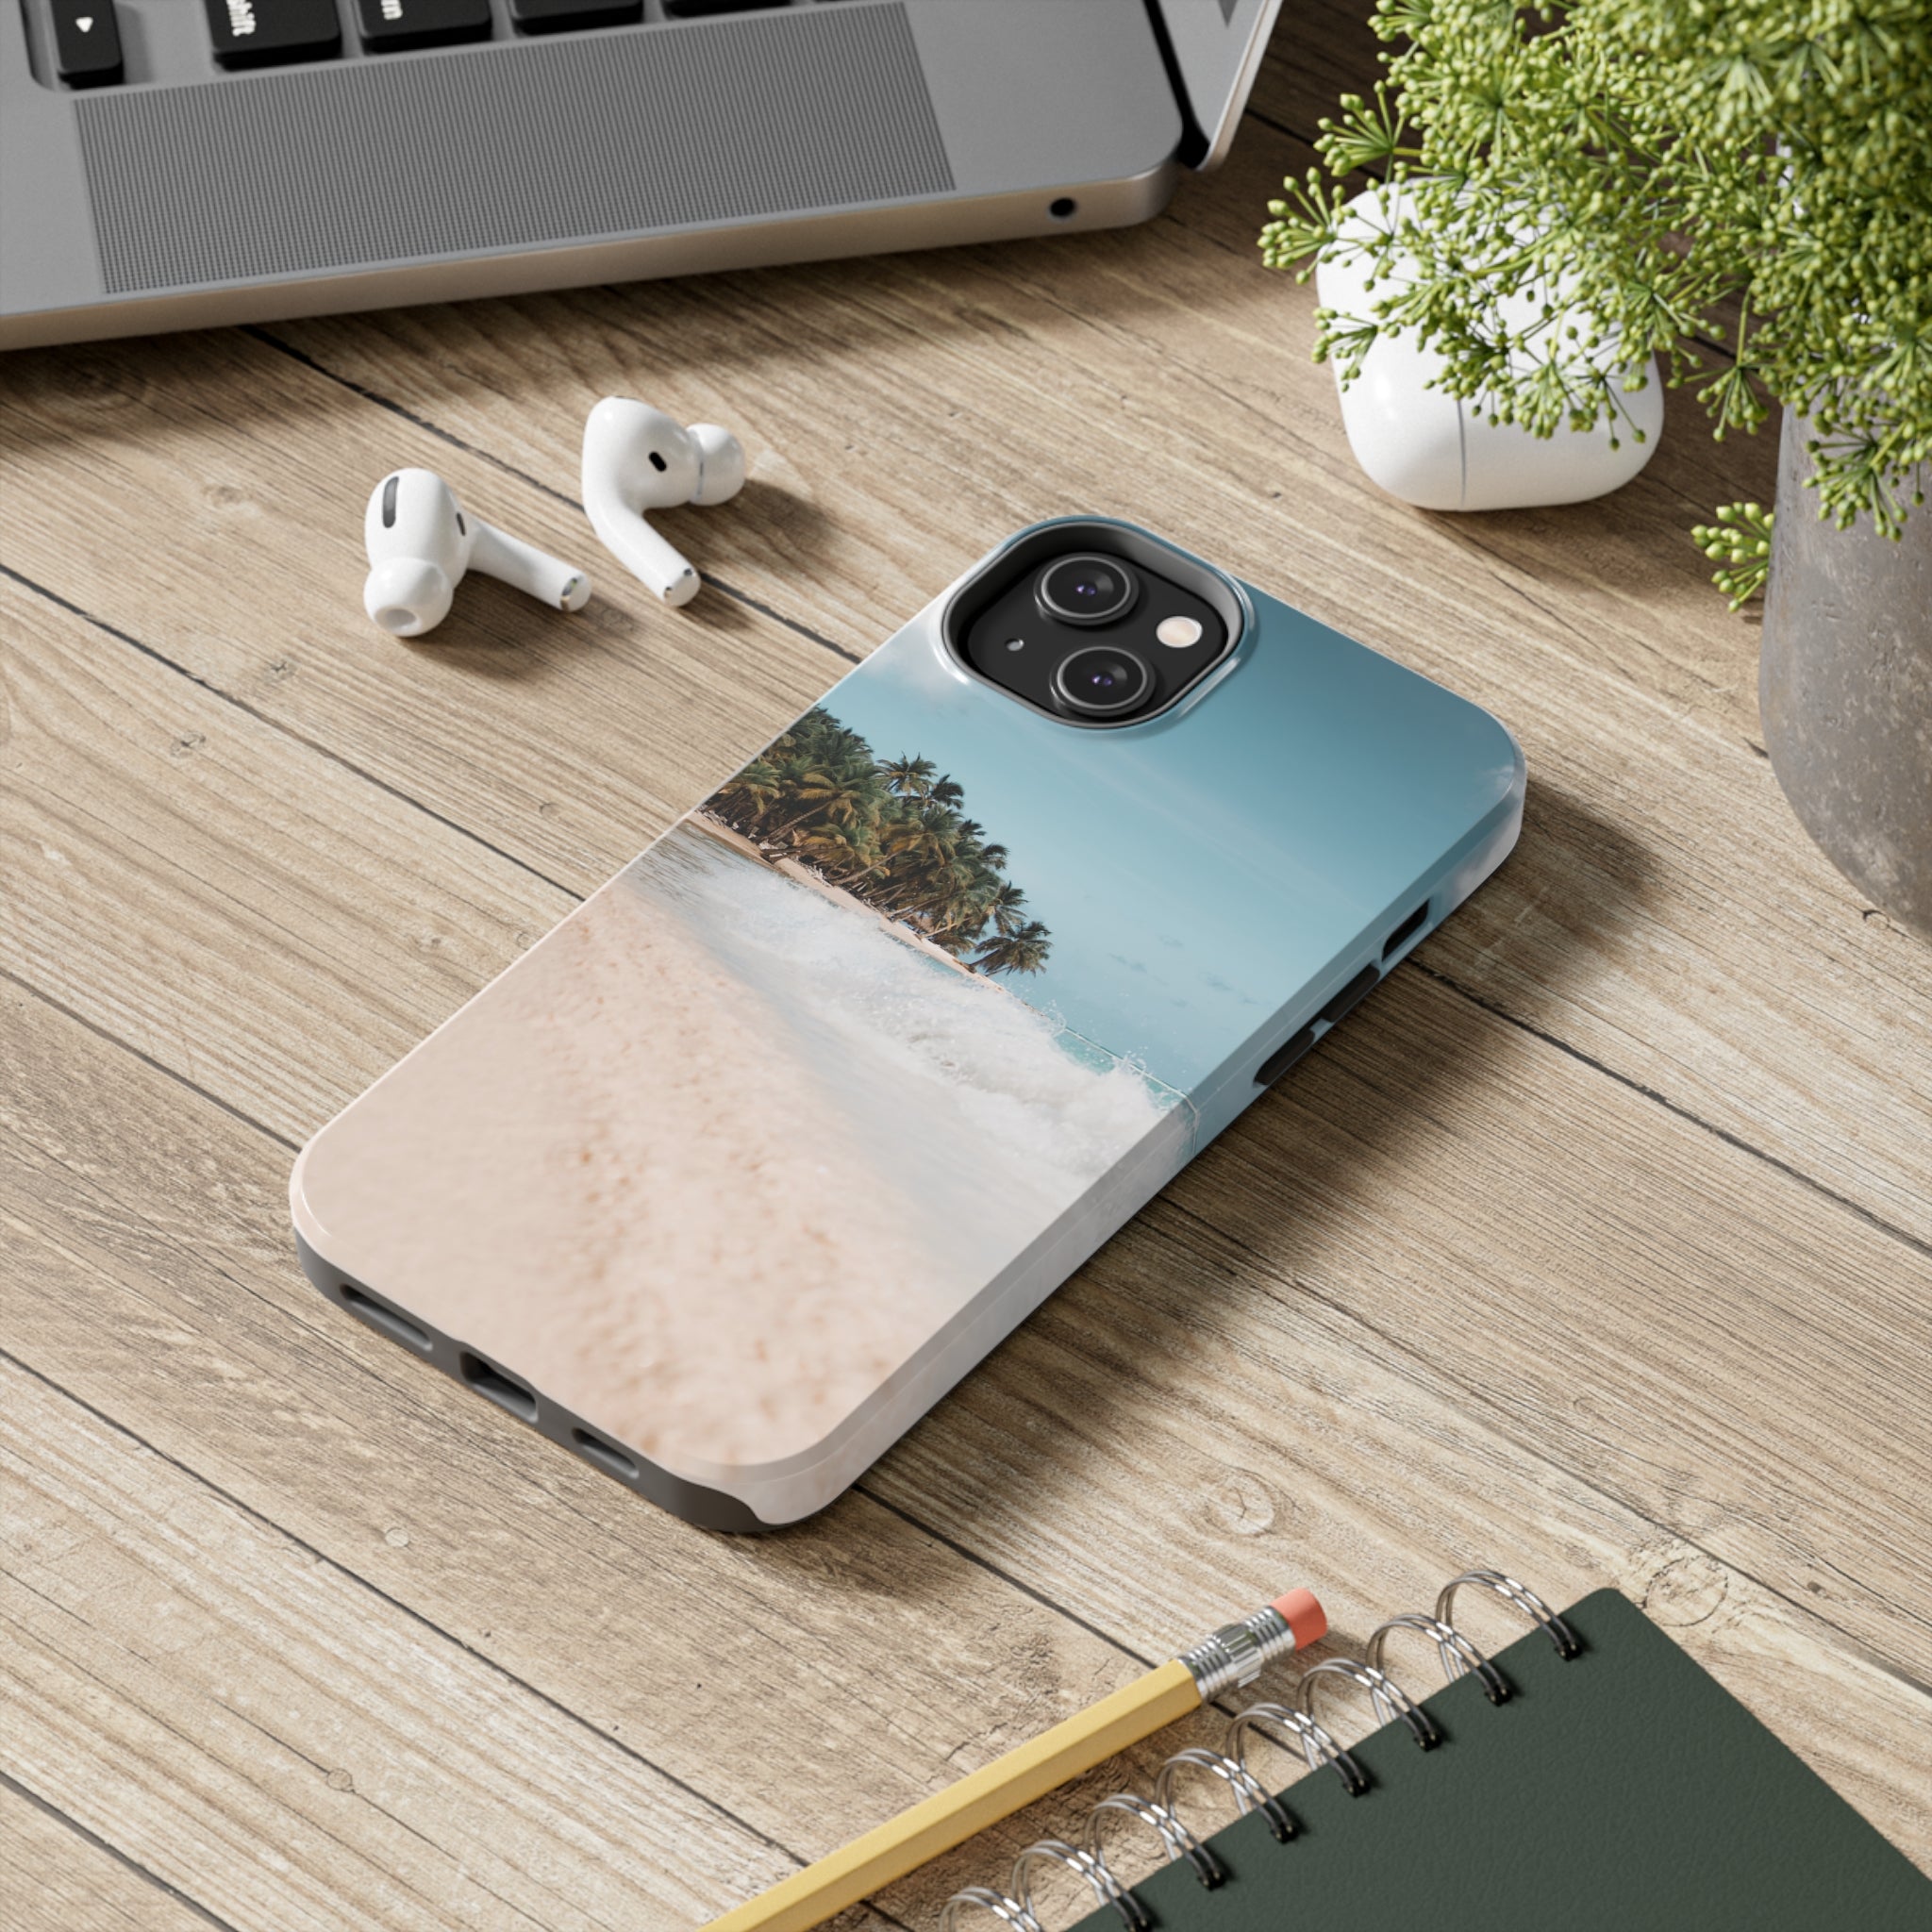 Dream Vacation -  iPhone Tough Cases